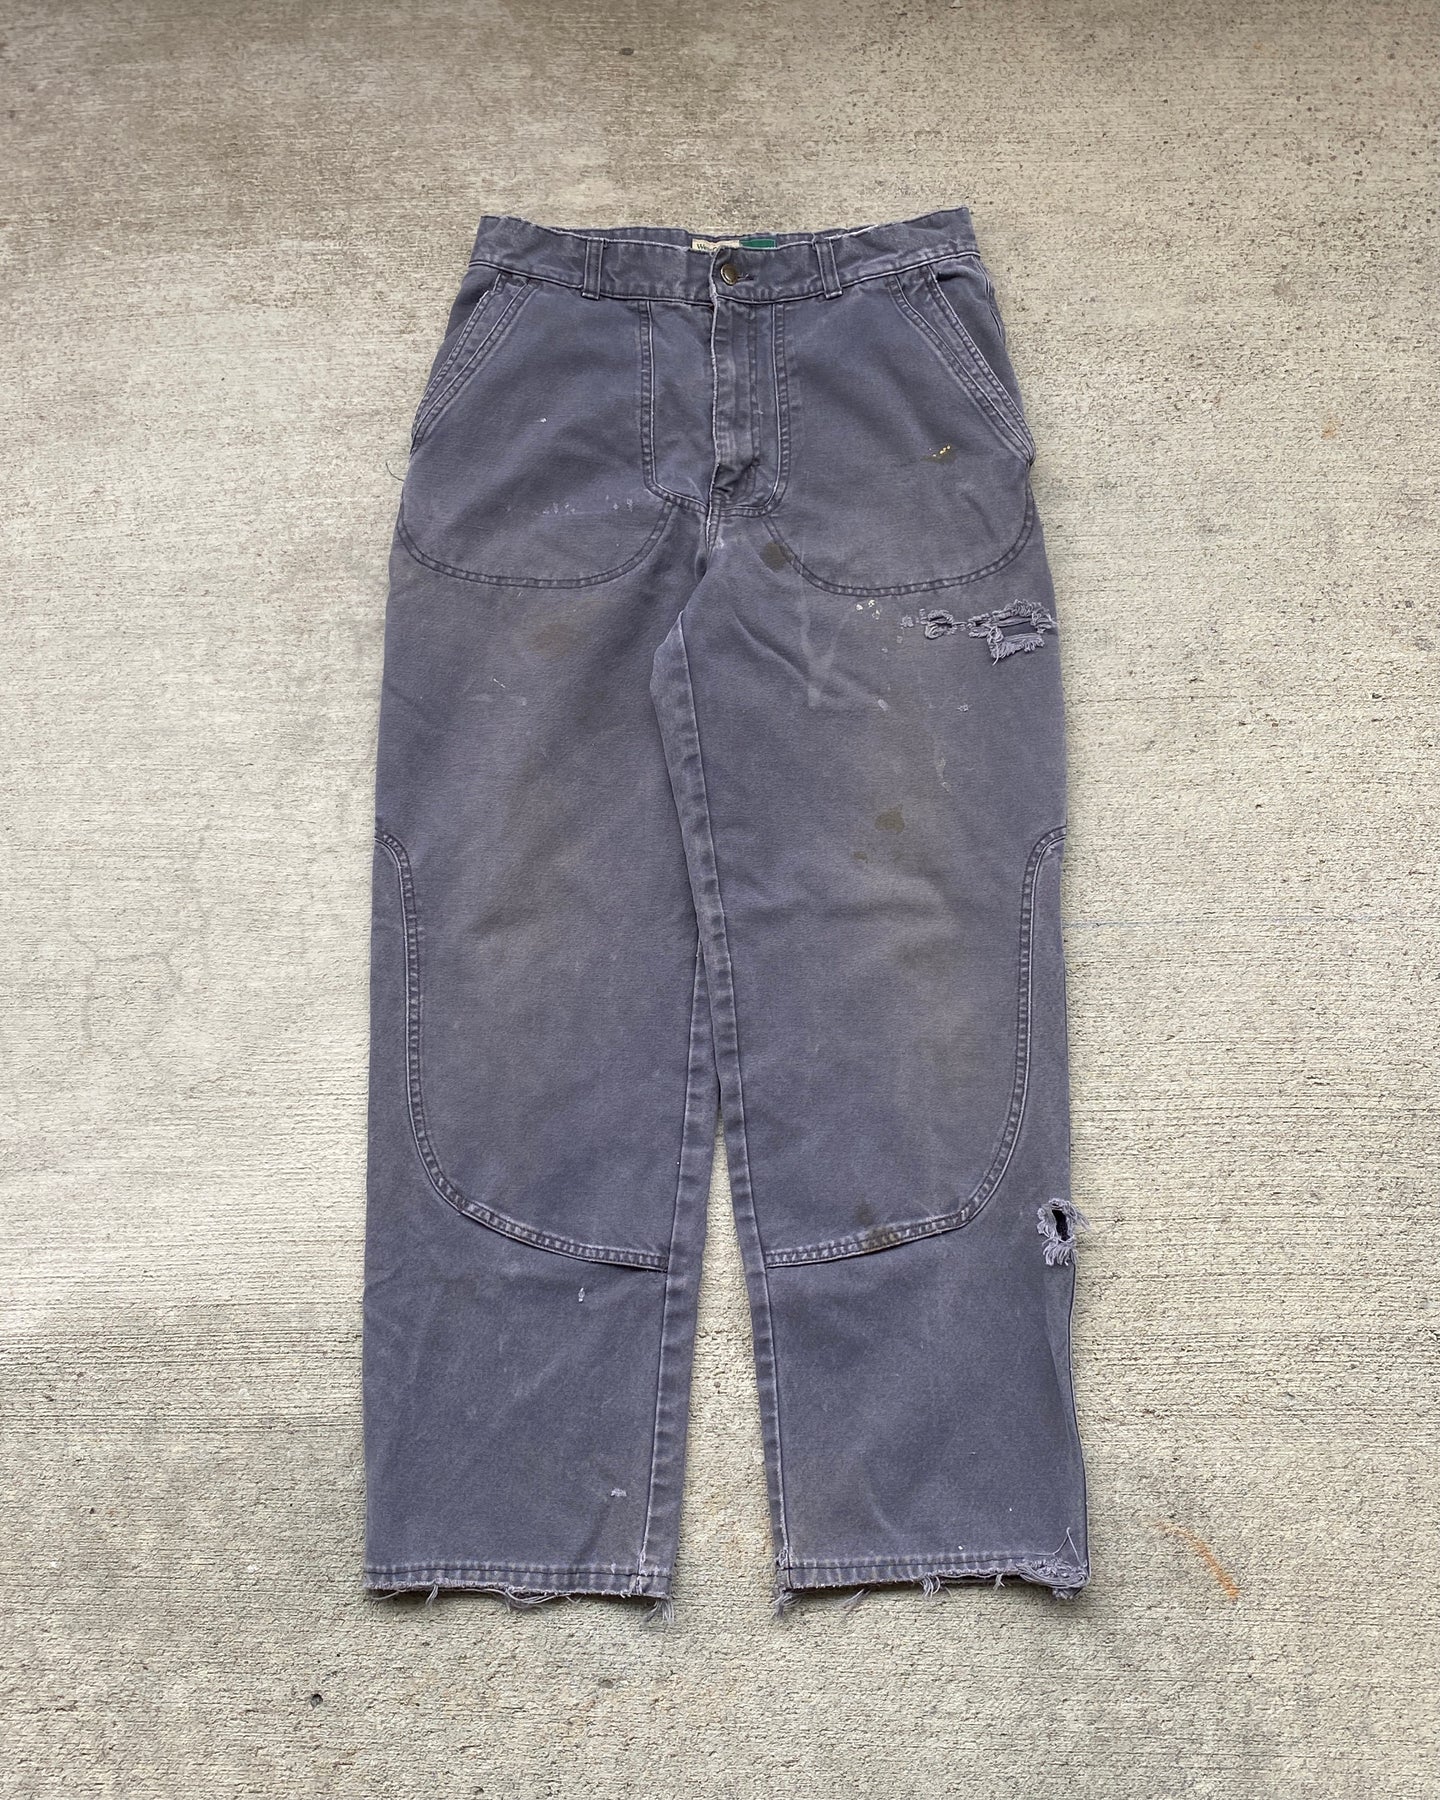 1990s WearGuard Canvas Double Knee Distressed Pants - Size 32 x 29